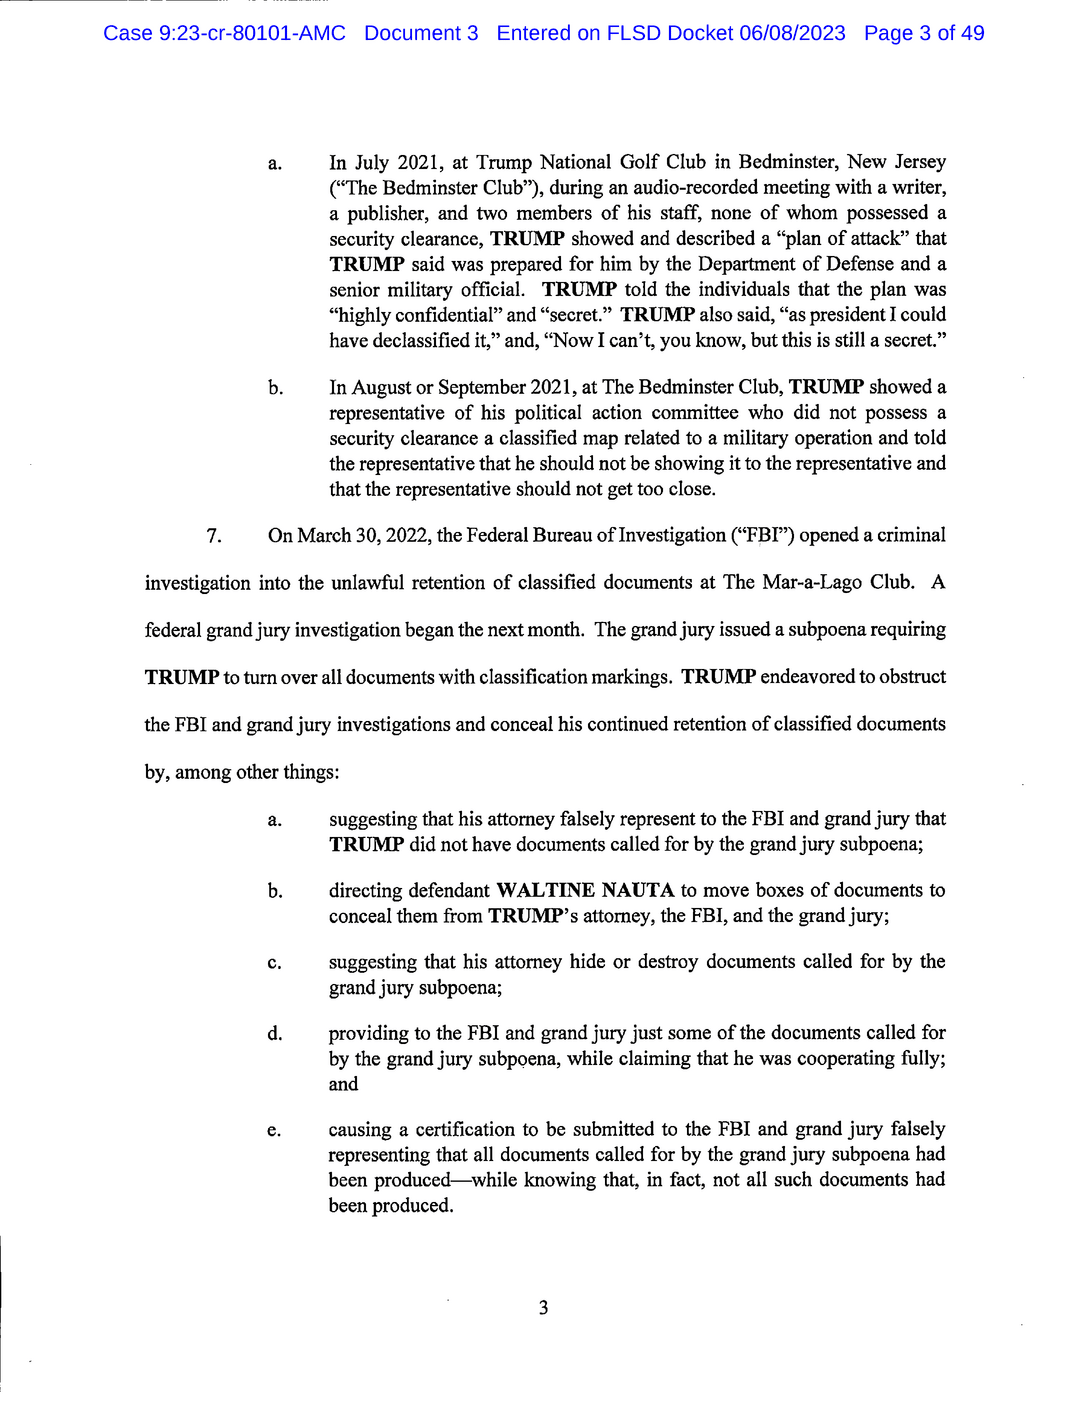 Page 3 of Donald Trump Classified Documents Indictment PDF document.